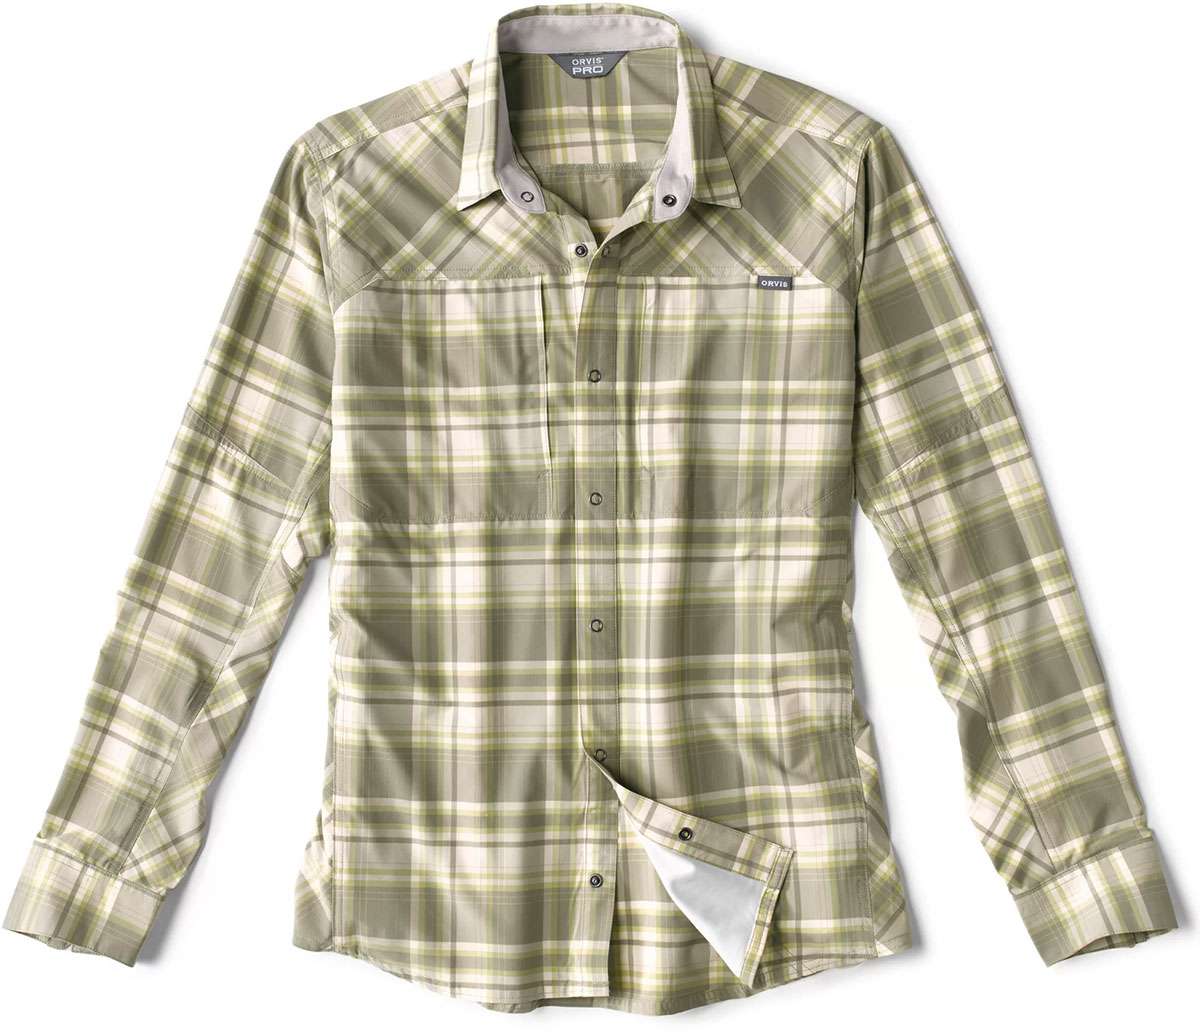 Orvis Pro Stretch Long-Sleeve Shirt - TackleDirect